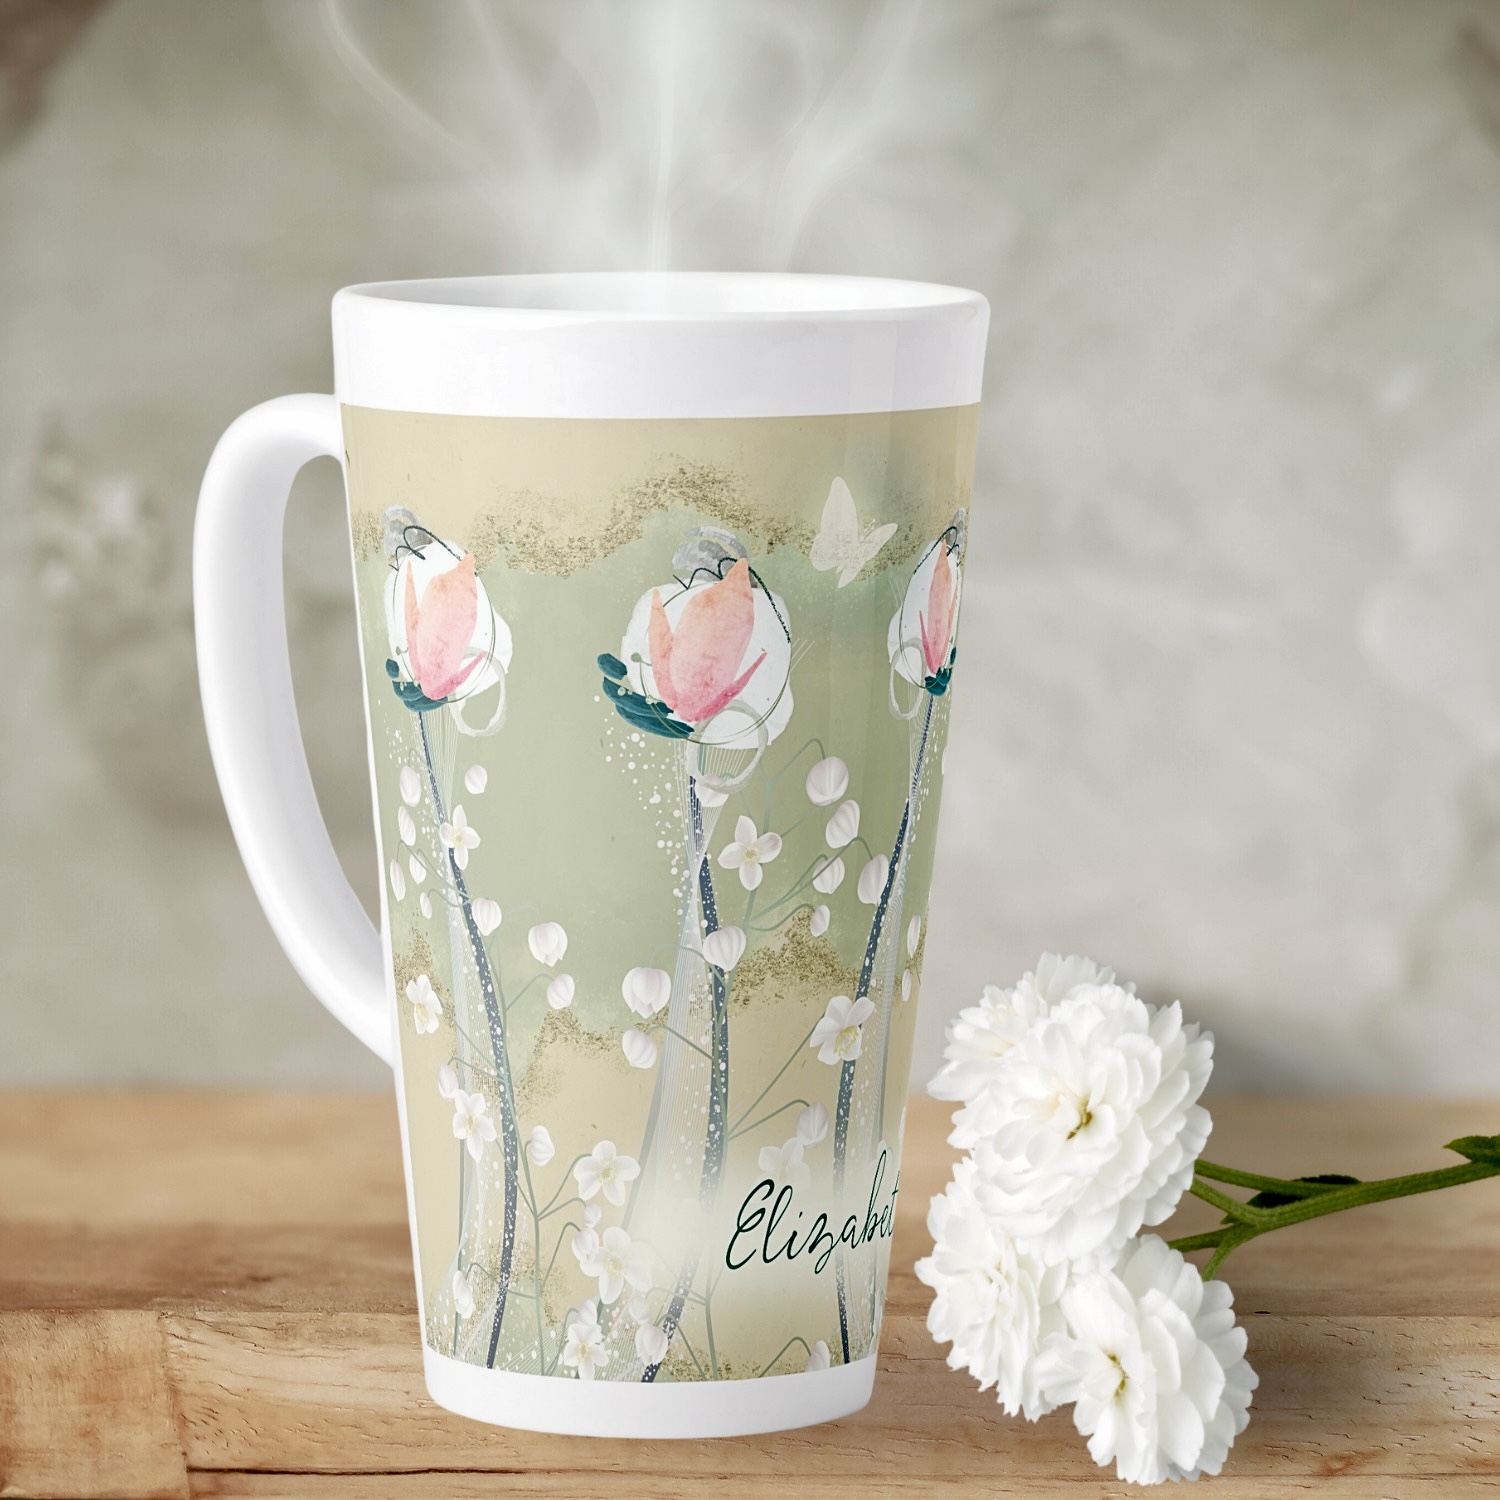 Close-up of a Boho Charm Personalized Latte Mug, featuring a delicate design of moss green and white pastel flowers, accented with earthy beige tones. The intricate floral pattern is complemented by a customizable name or message, adding a personal touch to the mug's charming bohemian style. The close-up view highlights the fine details and glossy finish, inviting a sense of warmth and relaxation. She shed perfect addition.